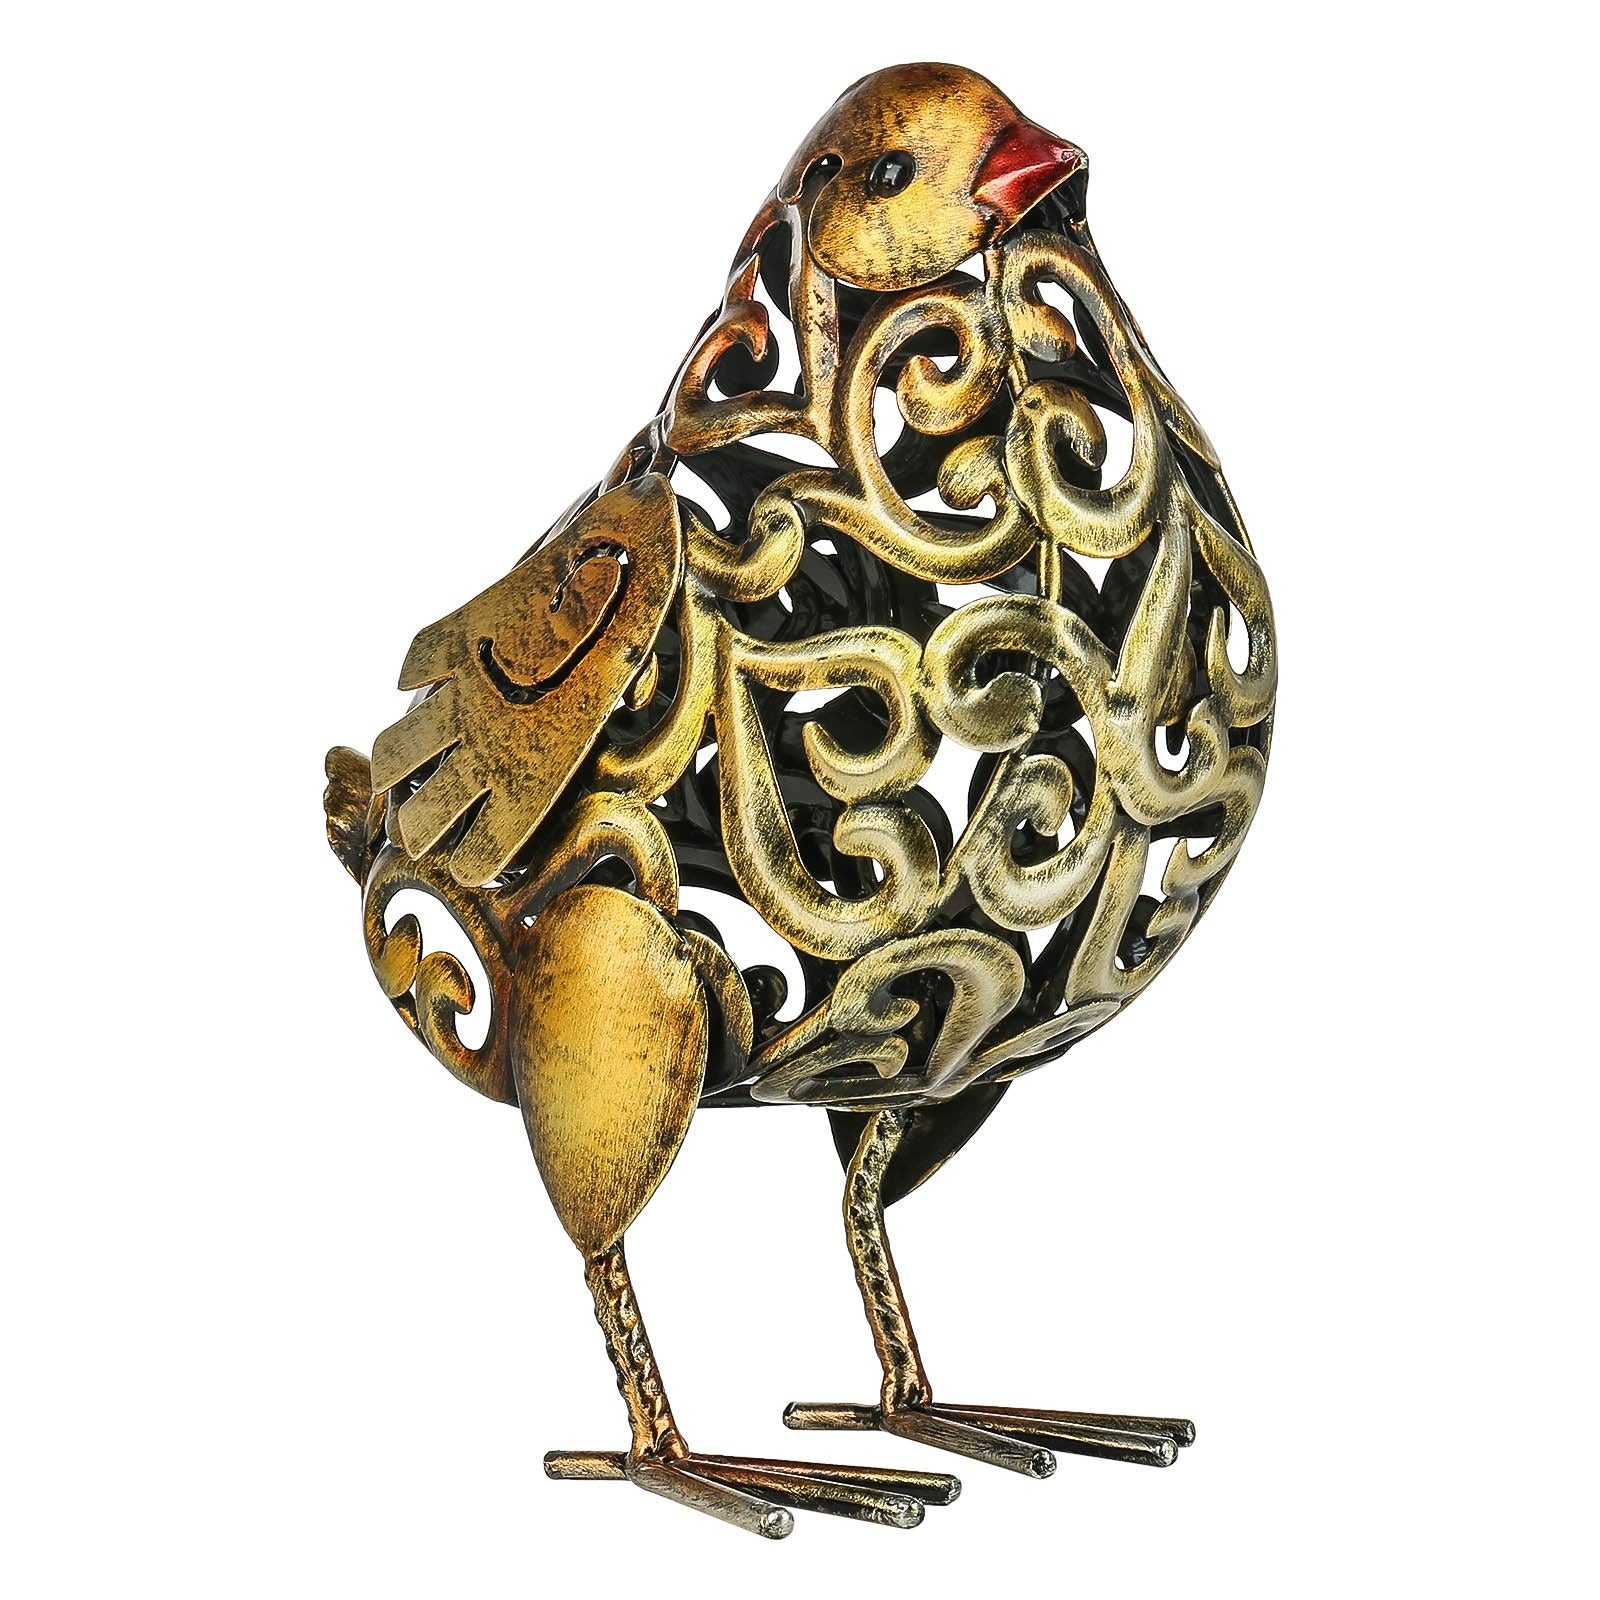 Give your home that rustic or cottage decor style with chicken sculpture!